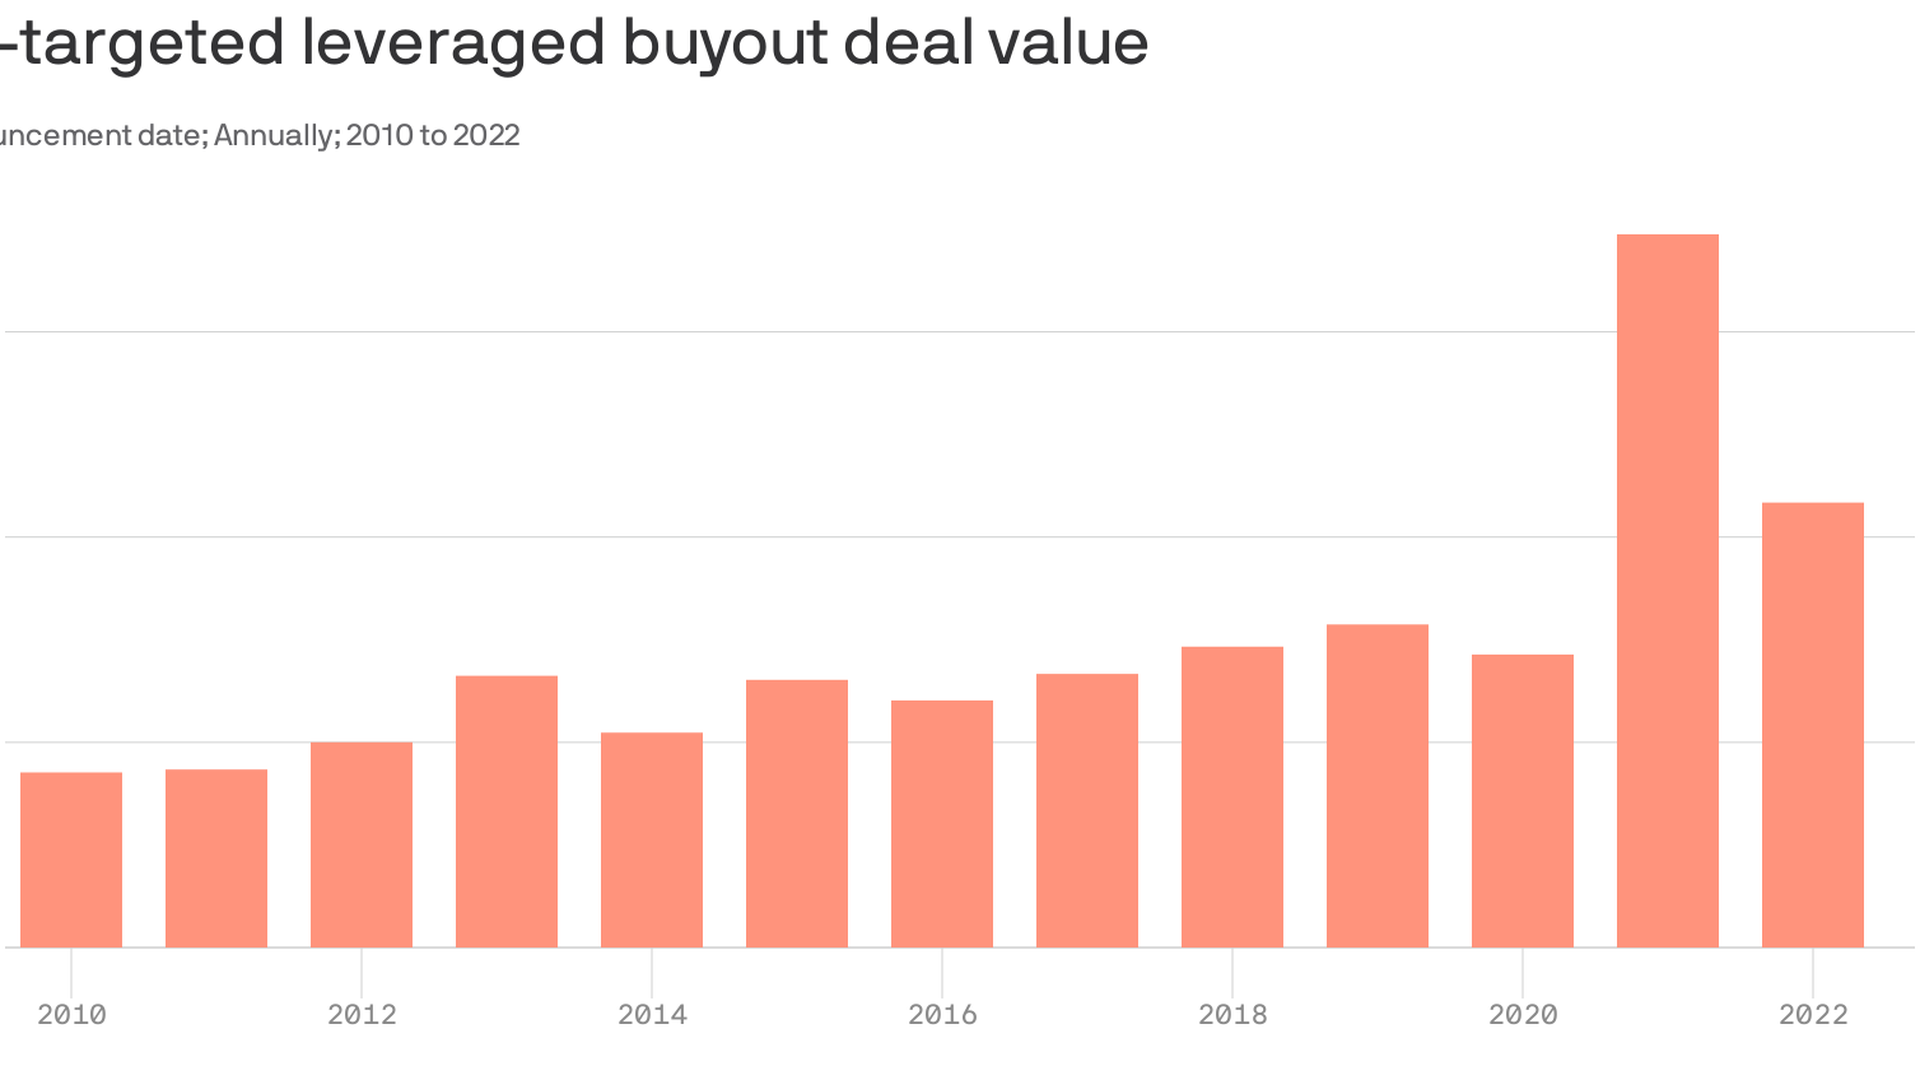 Chart shows U.S. targeted leverage buyout deal value